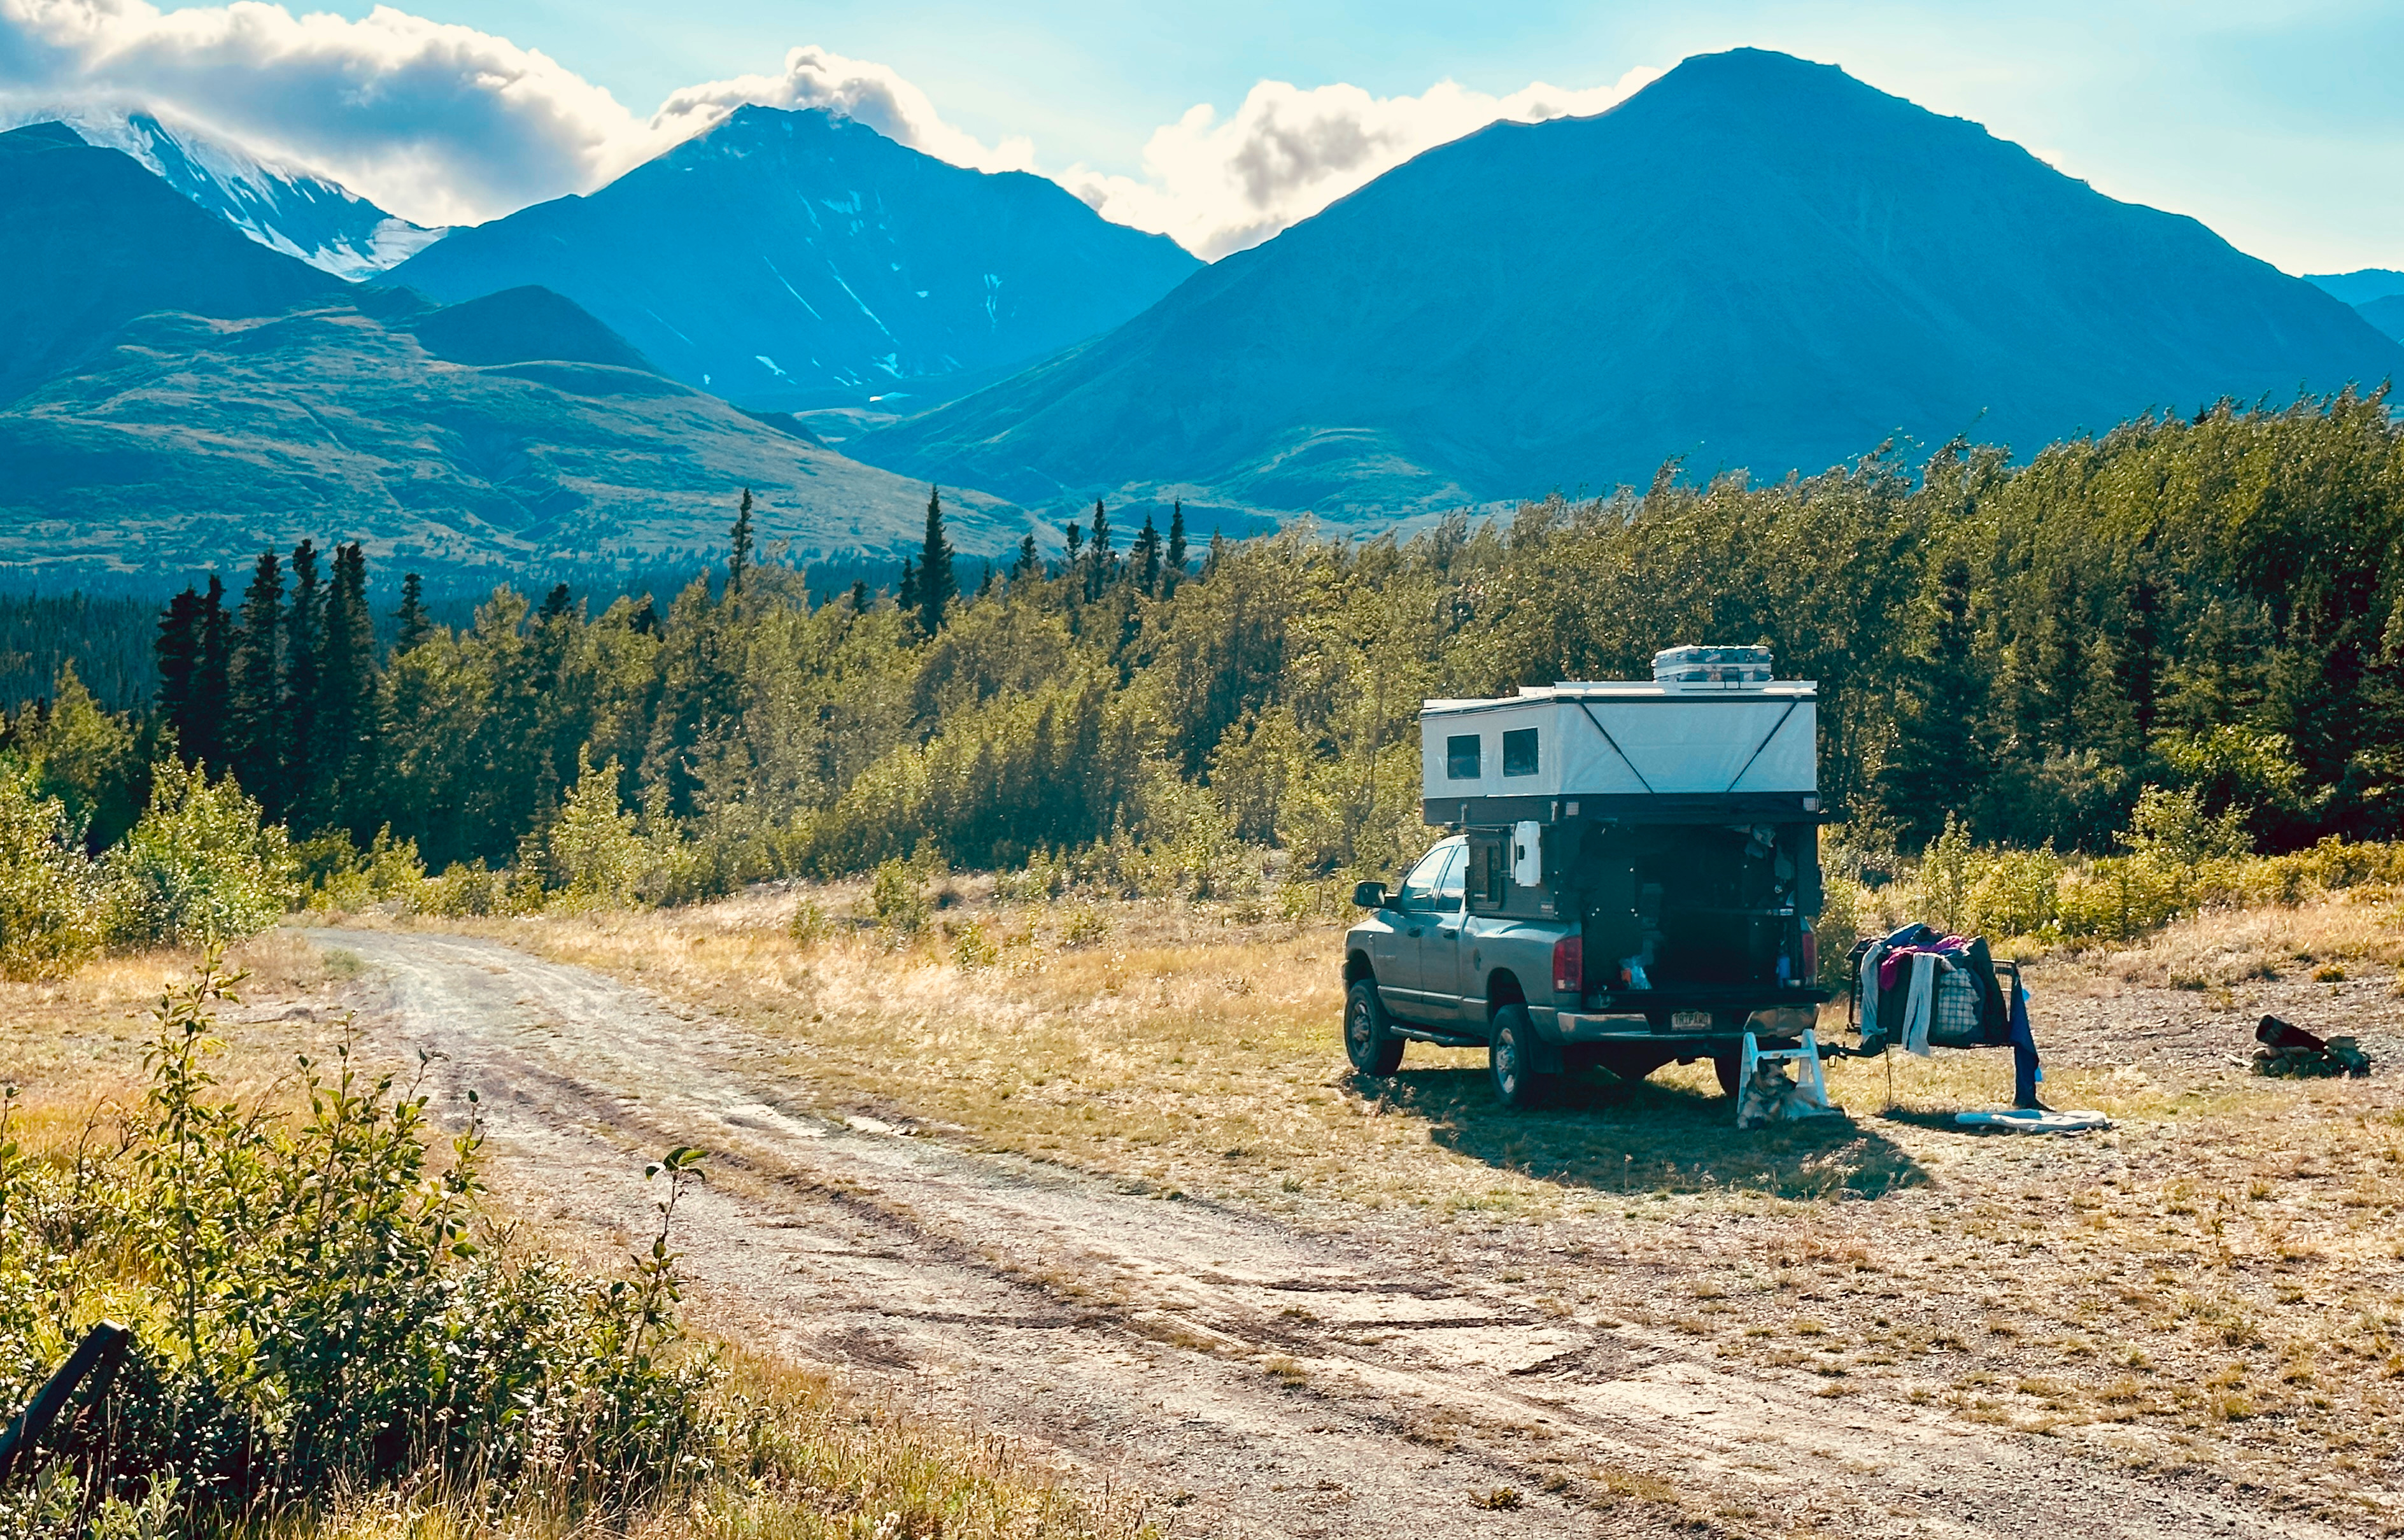 Mystery boondocking spot in the Yukon near Haines Junction.